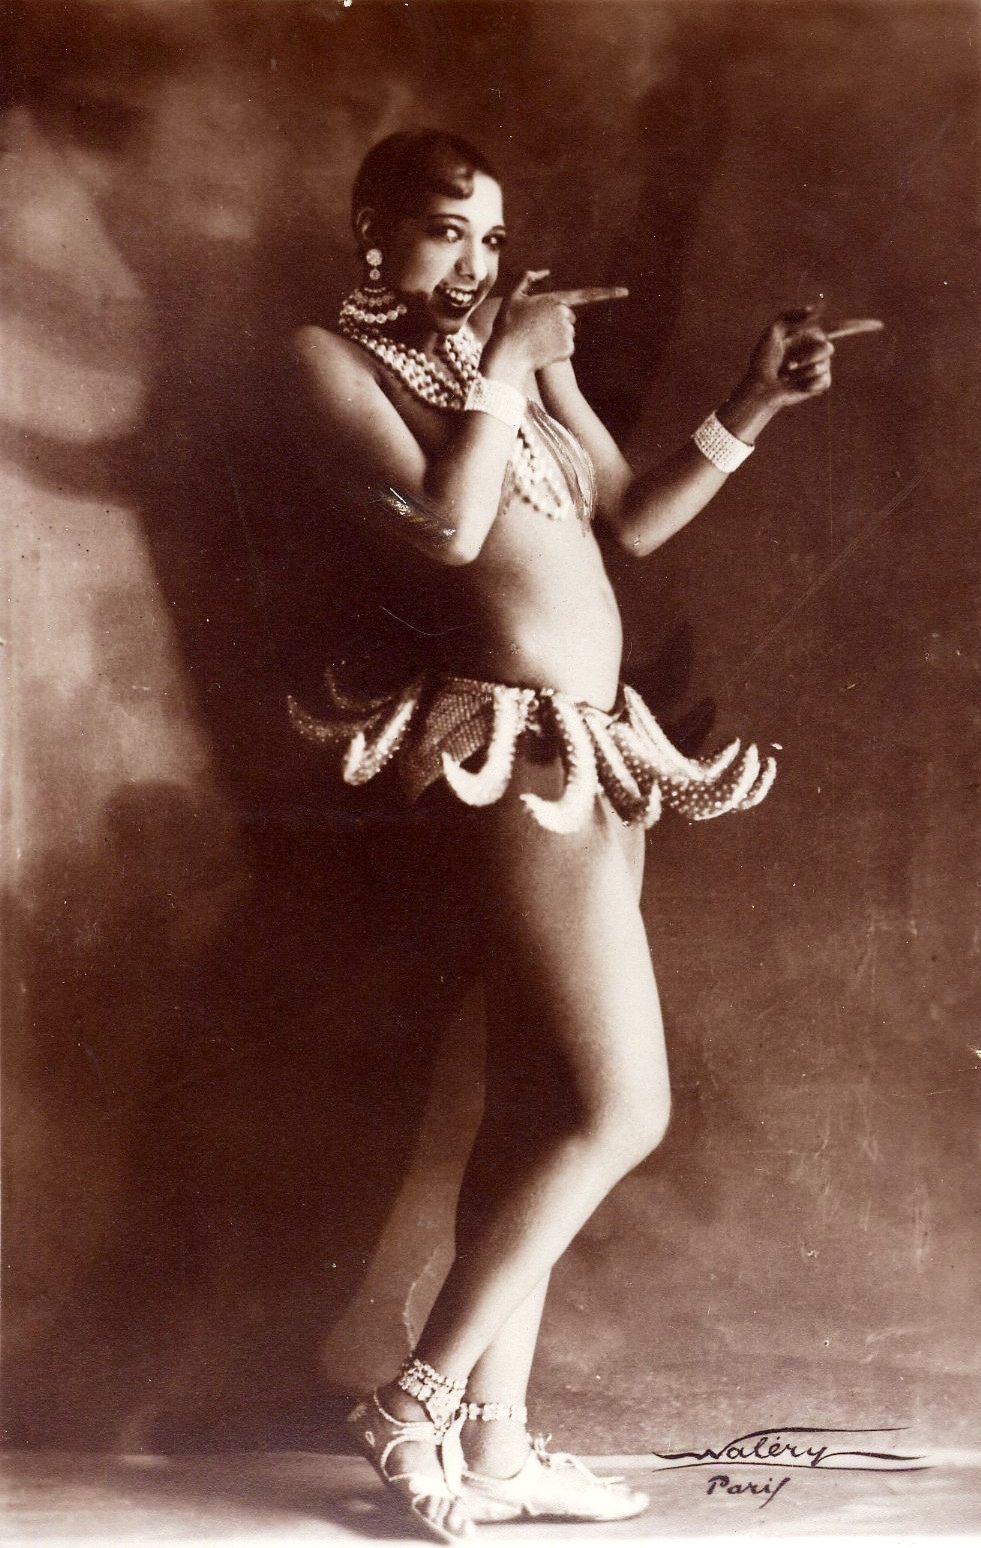 Sepia tone image of Josephine wearing her famous banana dress, with finger guns pointed away as she smiles.